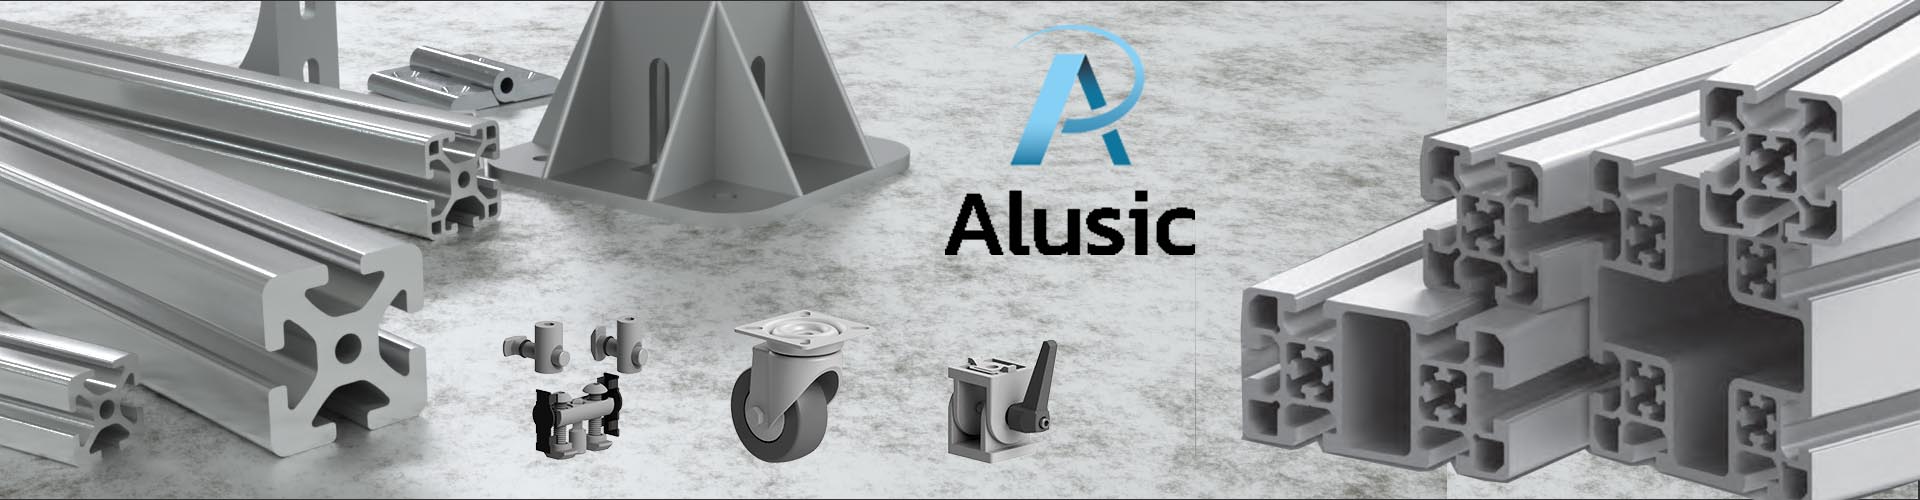 Alusic-profile-extrusion-banner-1920px